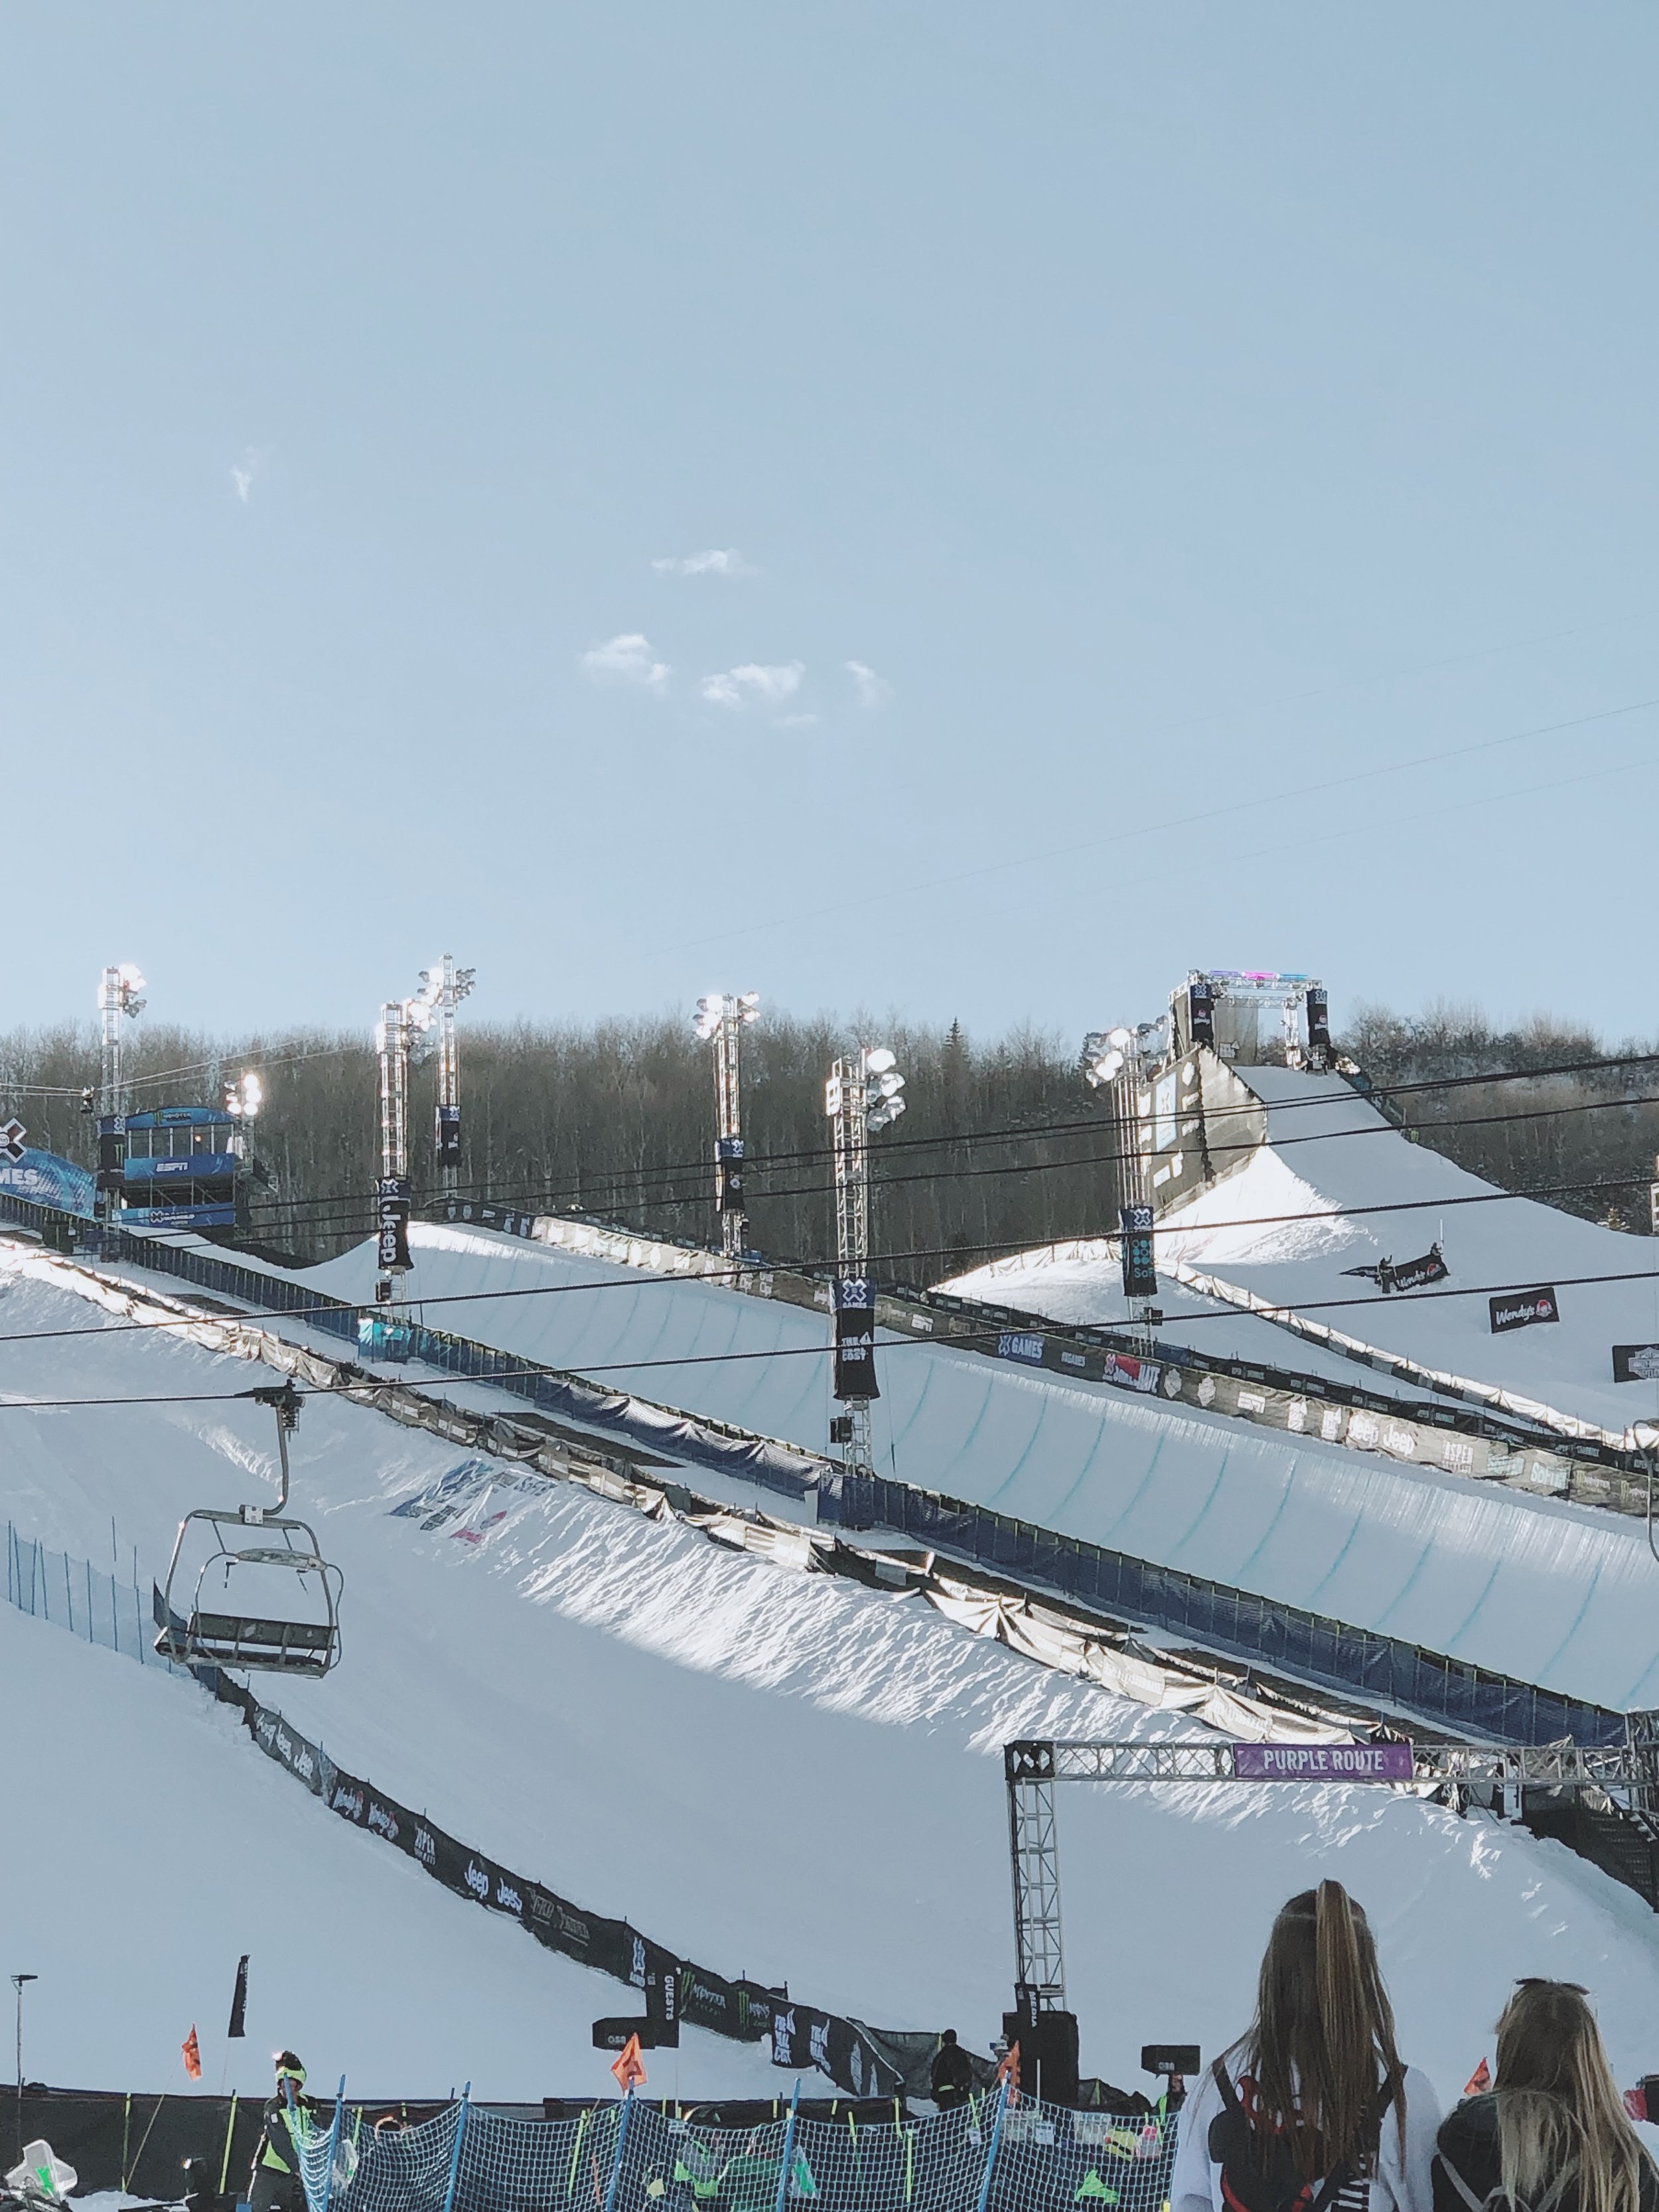 The Winter X-Games 101 | SaltWaterVibes 